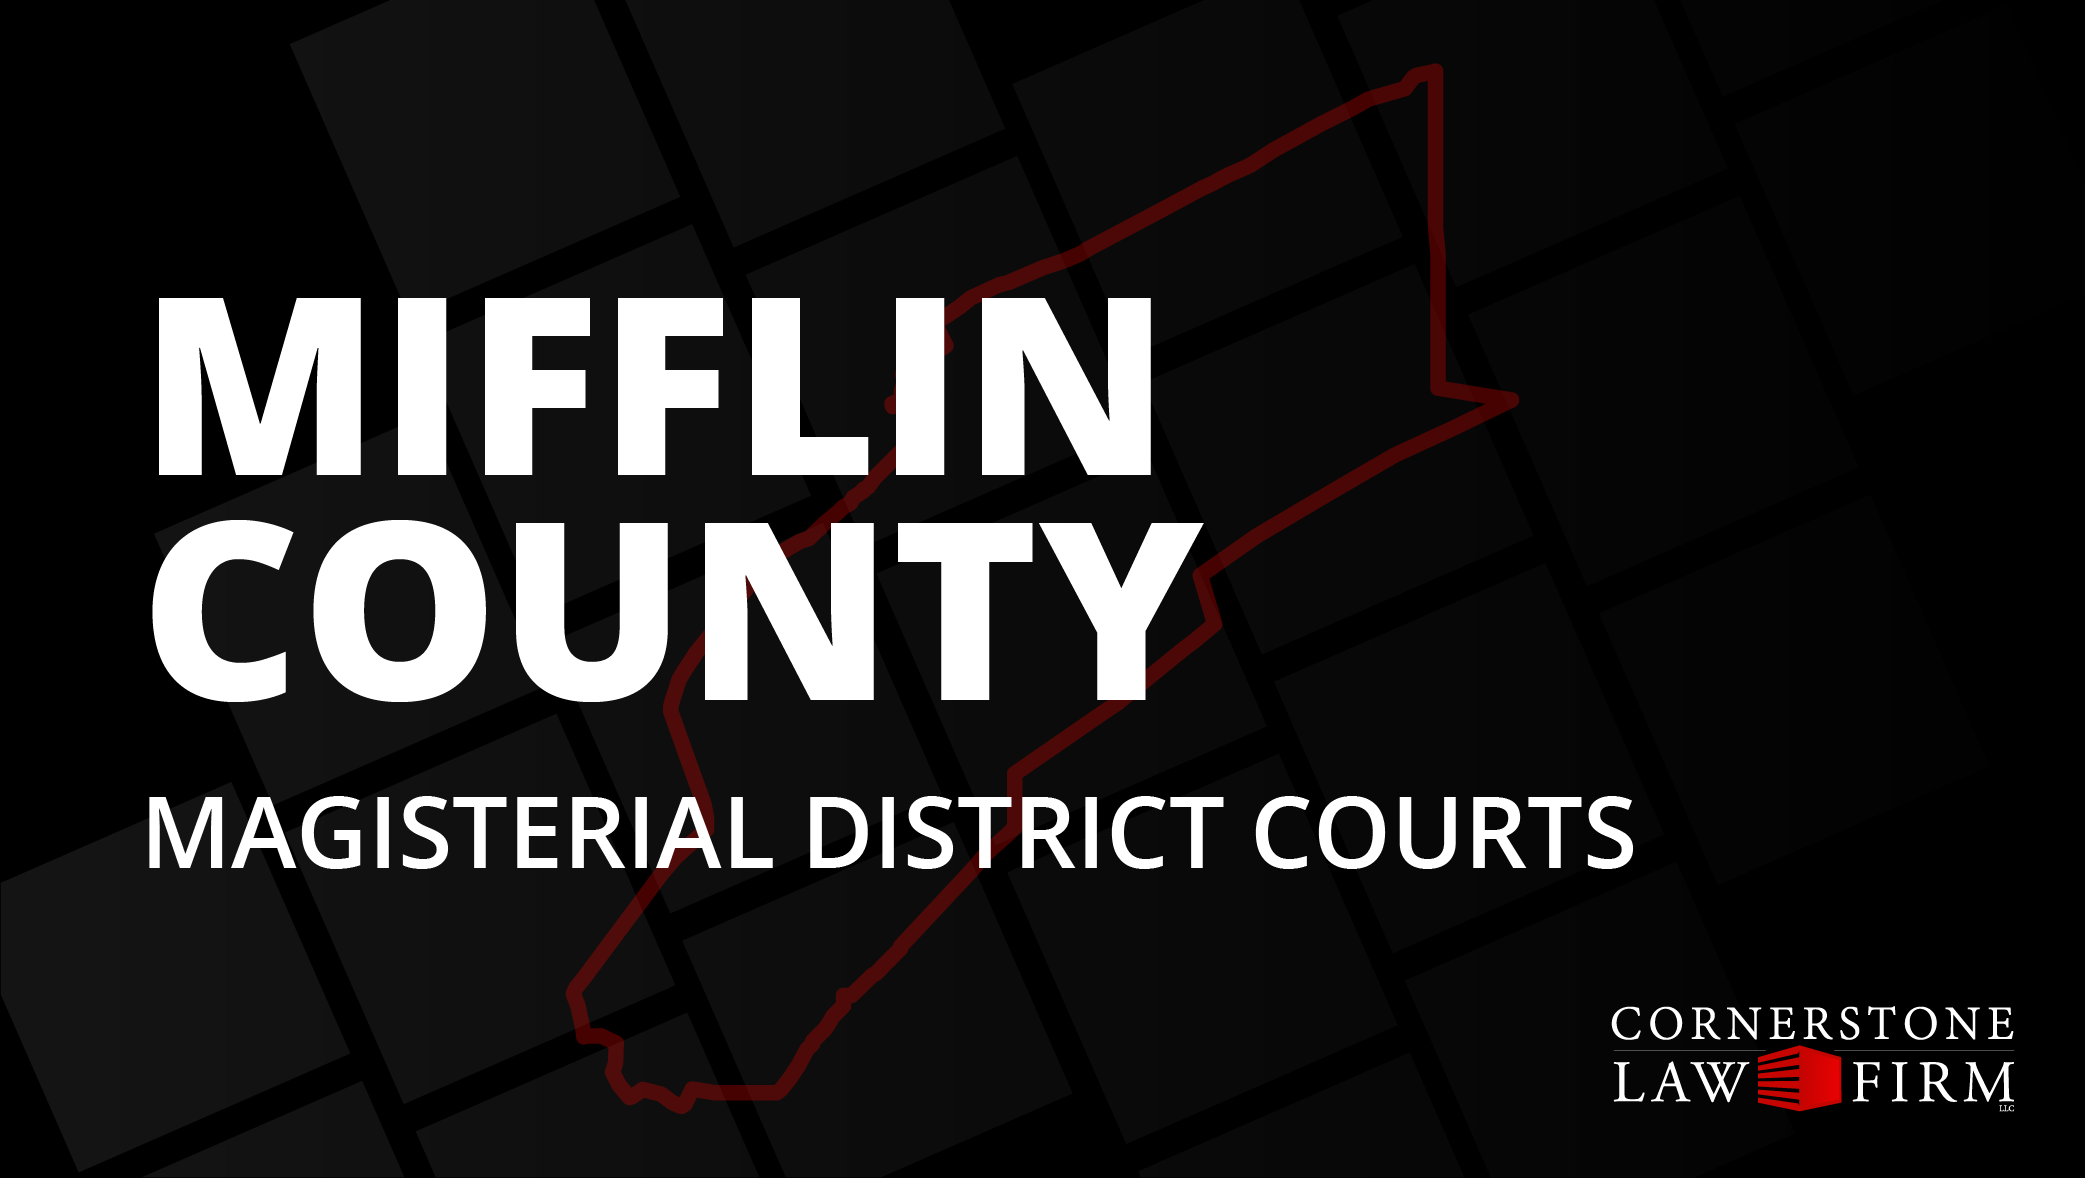 The words "Mifflin County Magisterial District Courts" over a black background with a faded red outline of the county.